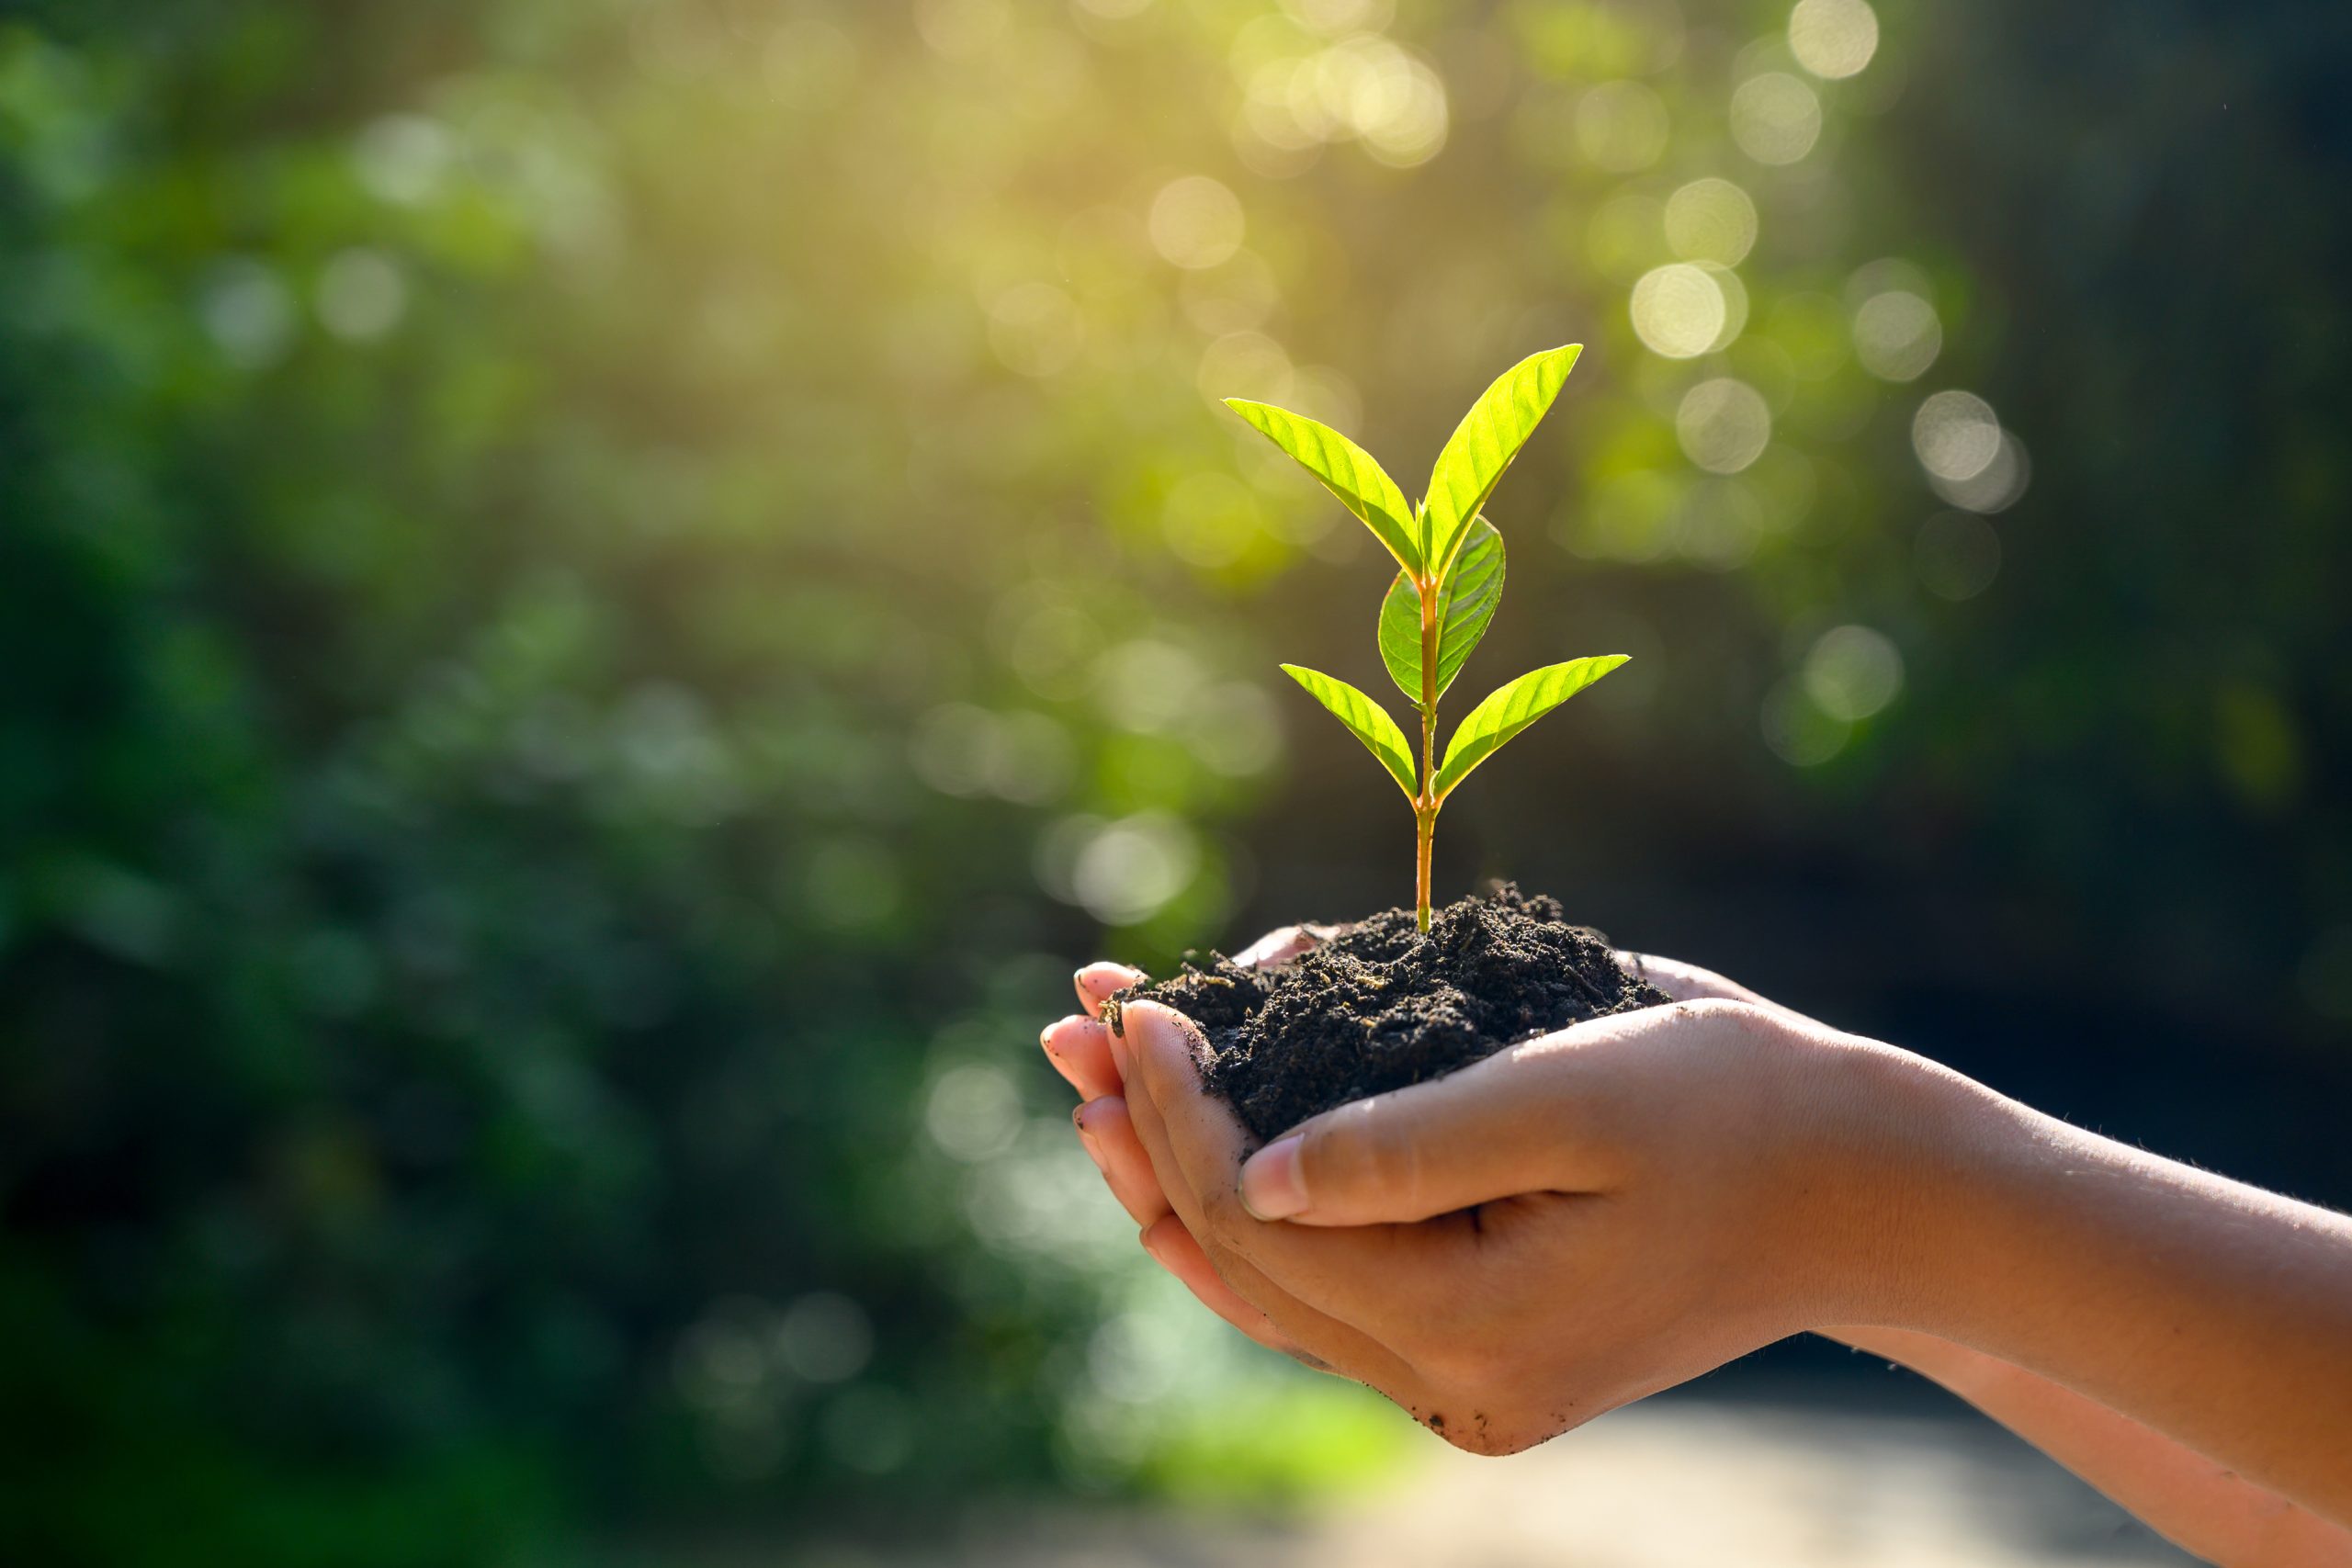 Global Technology Talent Solutions Leader Pledges to Plant 5,000 Trees Around the World